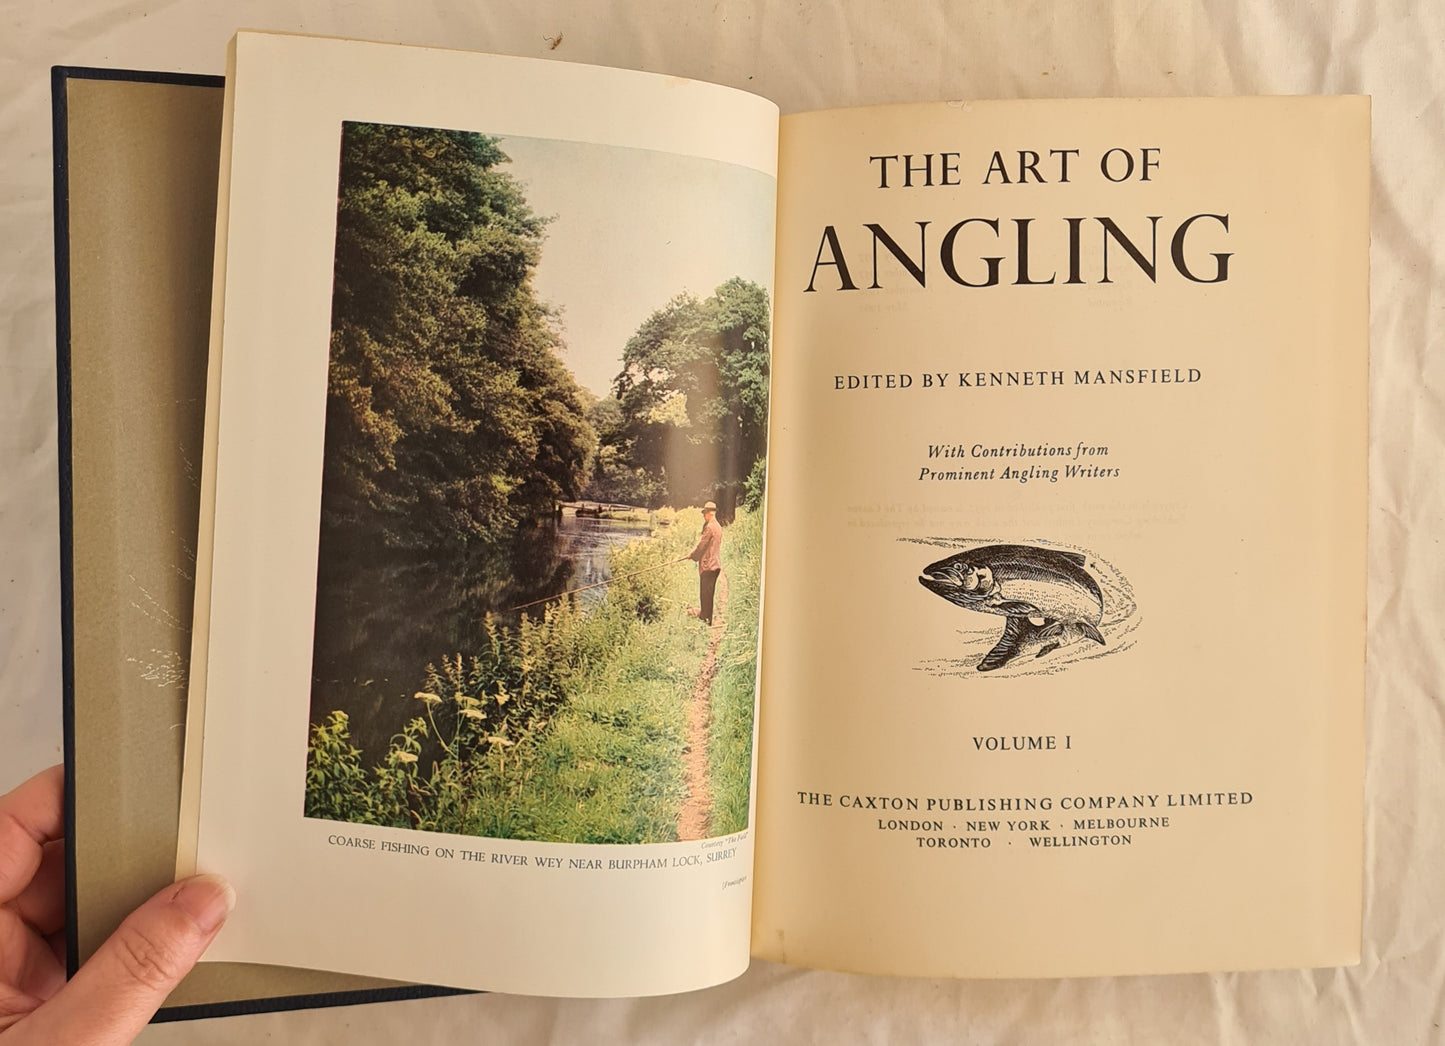 The Art of Angling  Edited by Kenneth Mansfield  With Contributions from Prominent Angling Writers  THREE VOLUME SET - COMPLETE